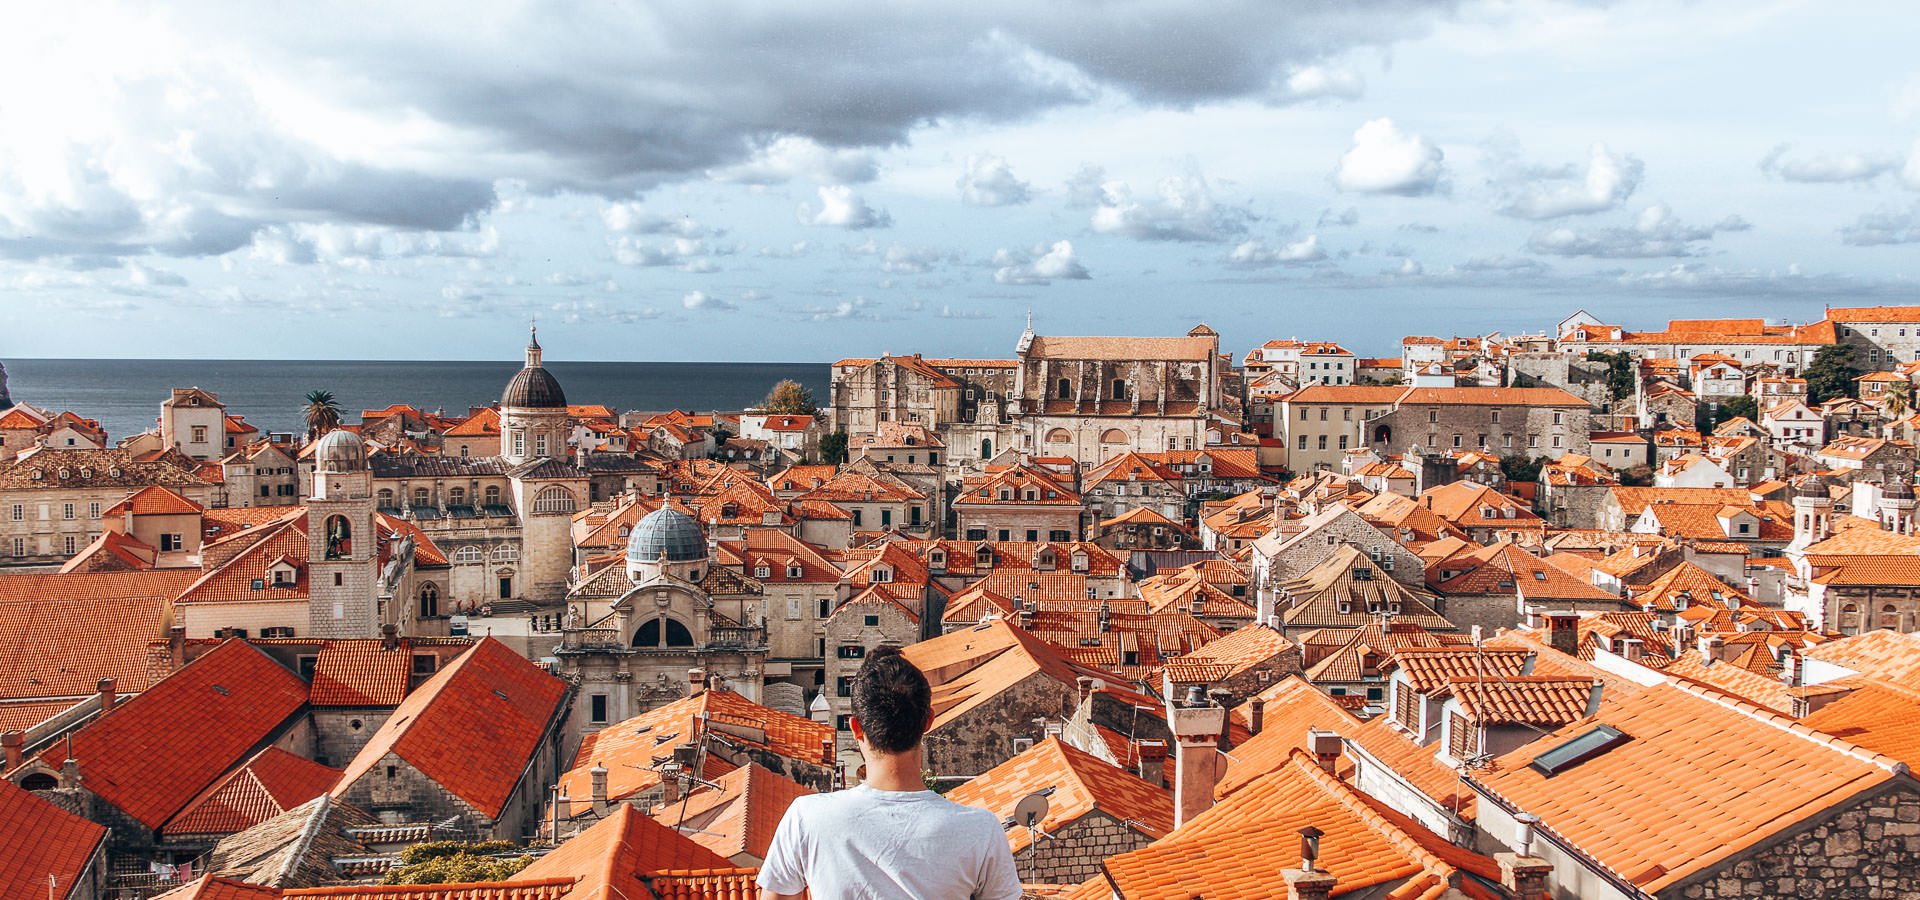 How To Spend 48 Hours In Dubrovnik | 3 days in lisbon 4